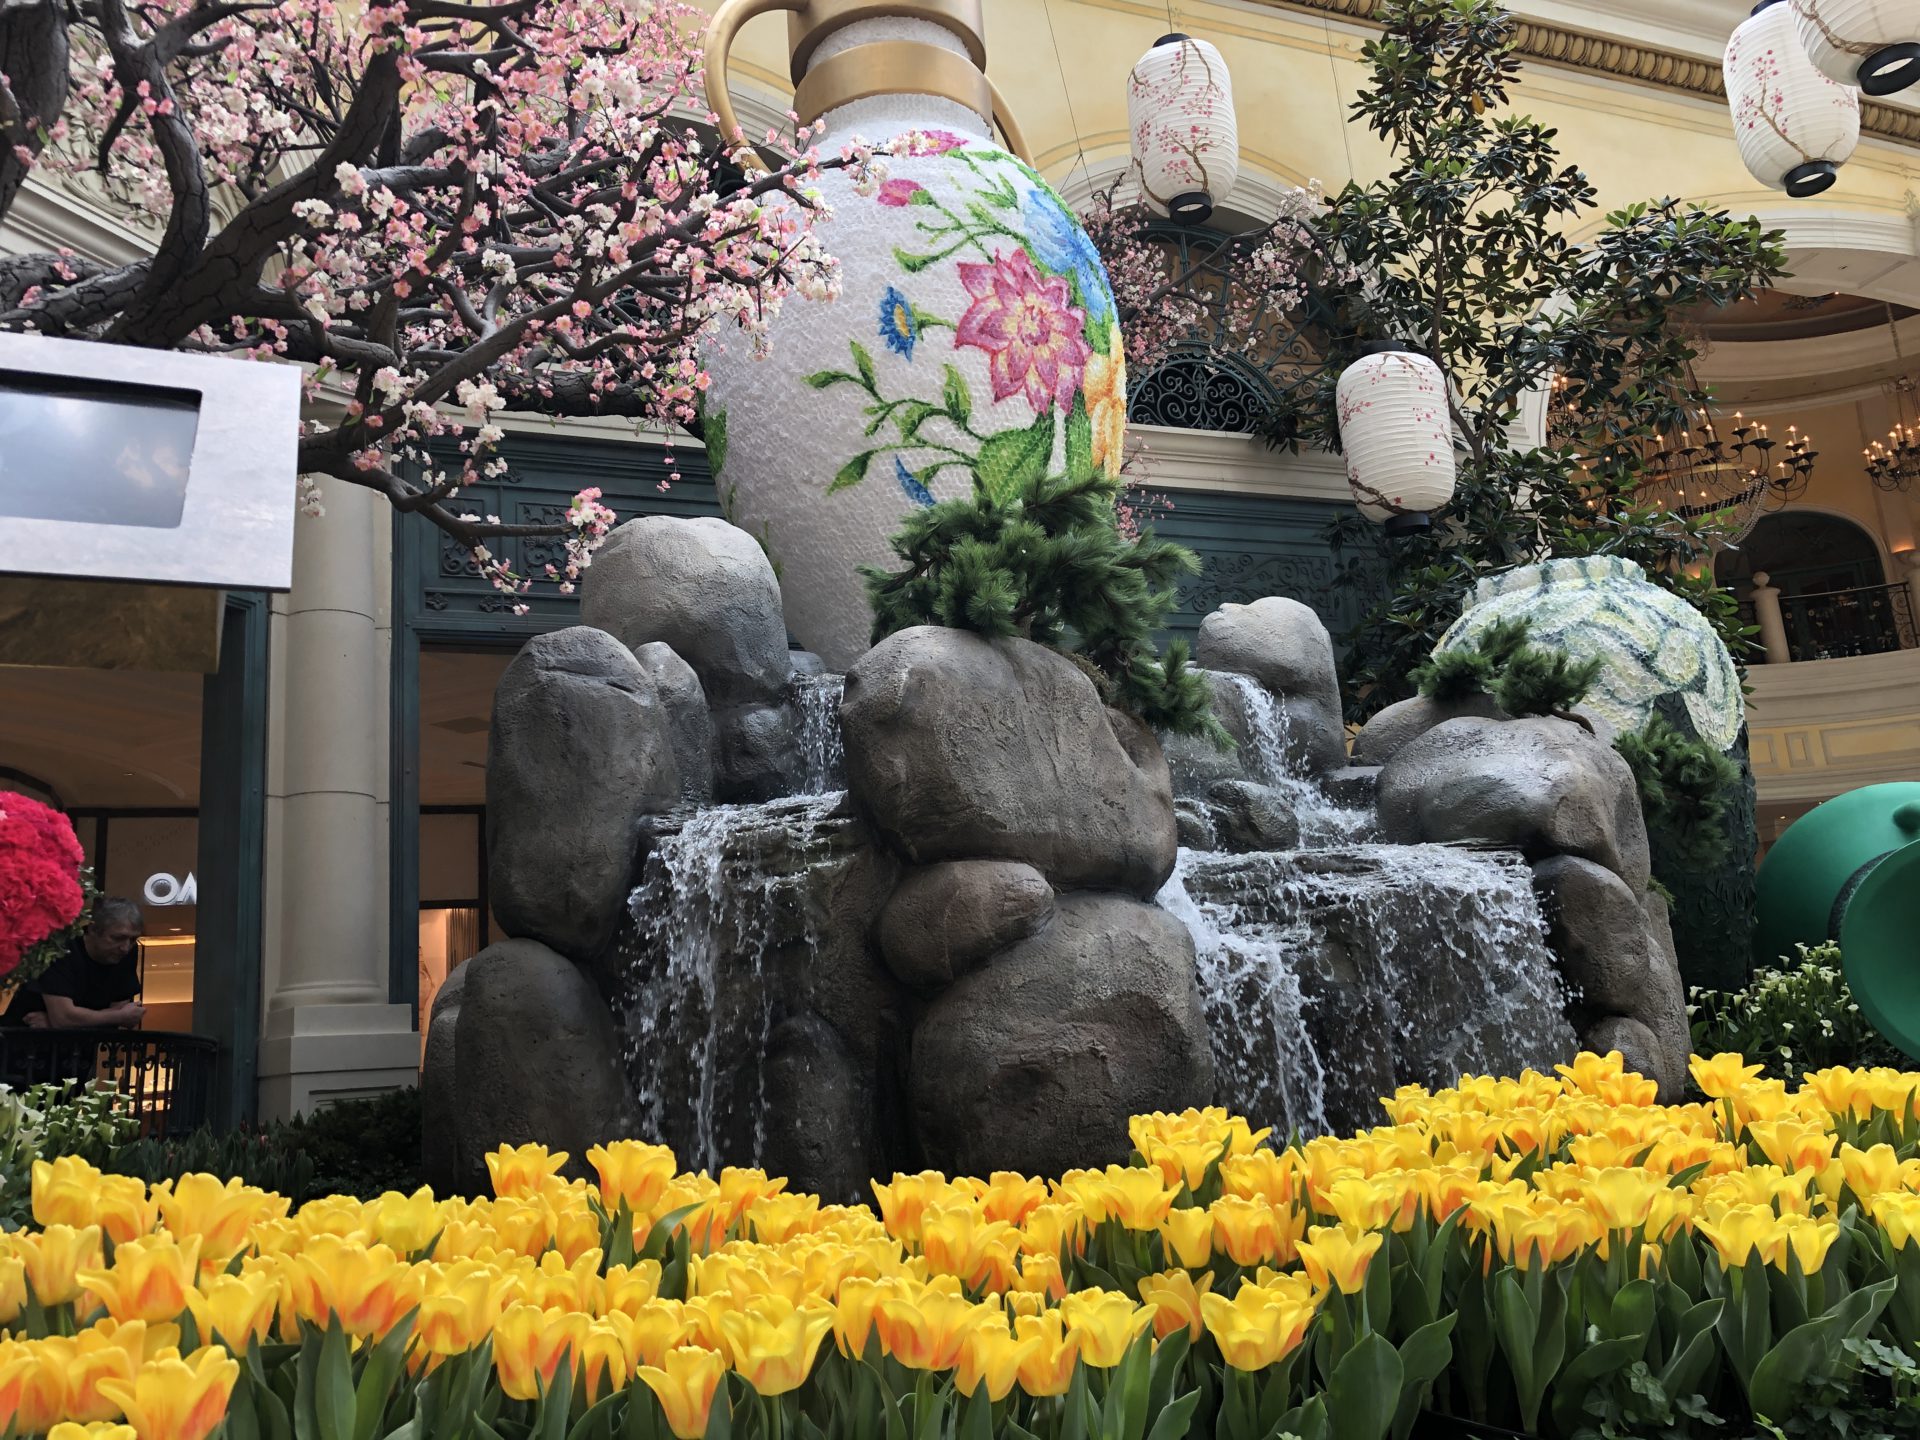 The Bellagio Conservatory displayed in lush botanical, vibrant floral arrangements, and intricate seasonal themes as one of the iconic Las Vegas Attractions